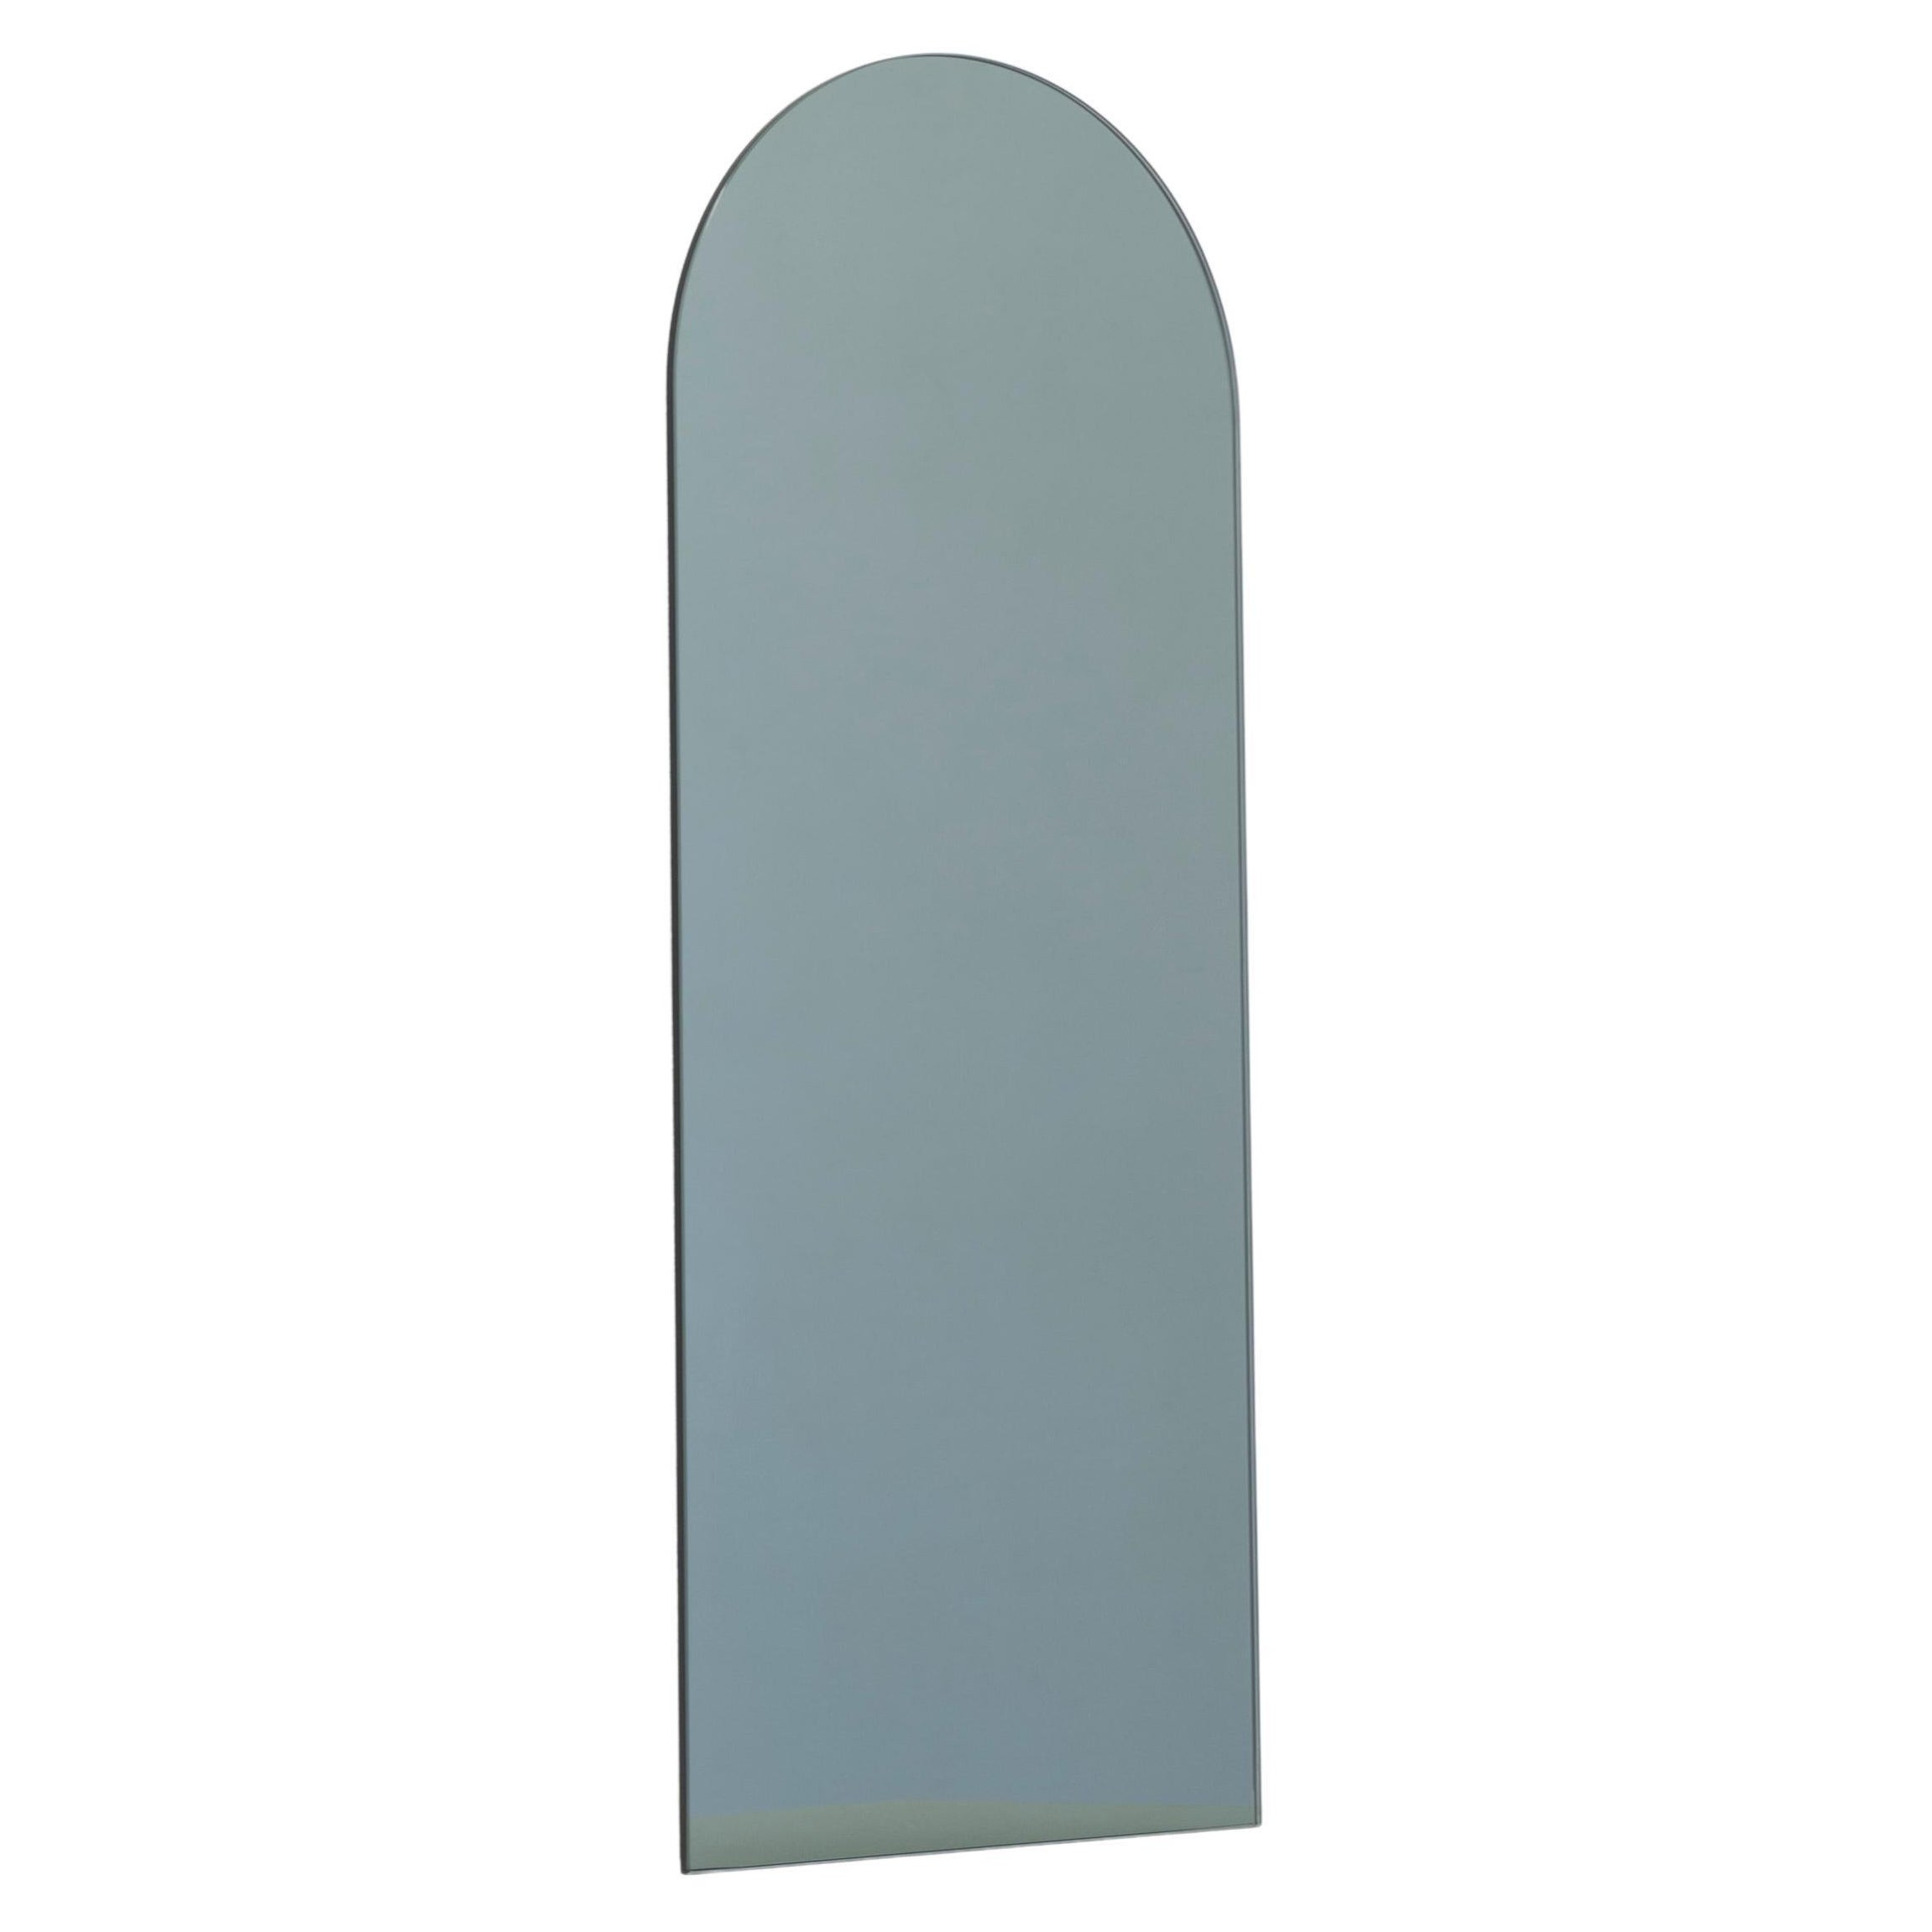 In stock Arcus Black Tinted Arched Contemporary Mirror, Small For Sale